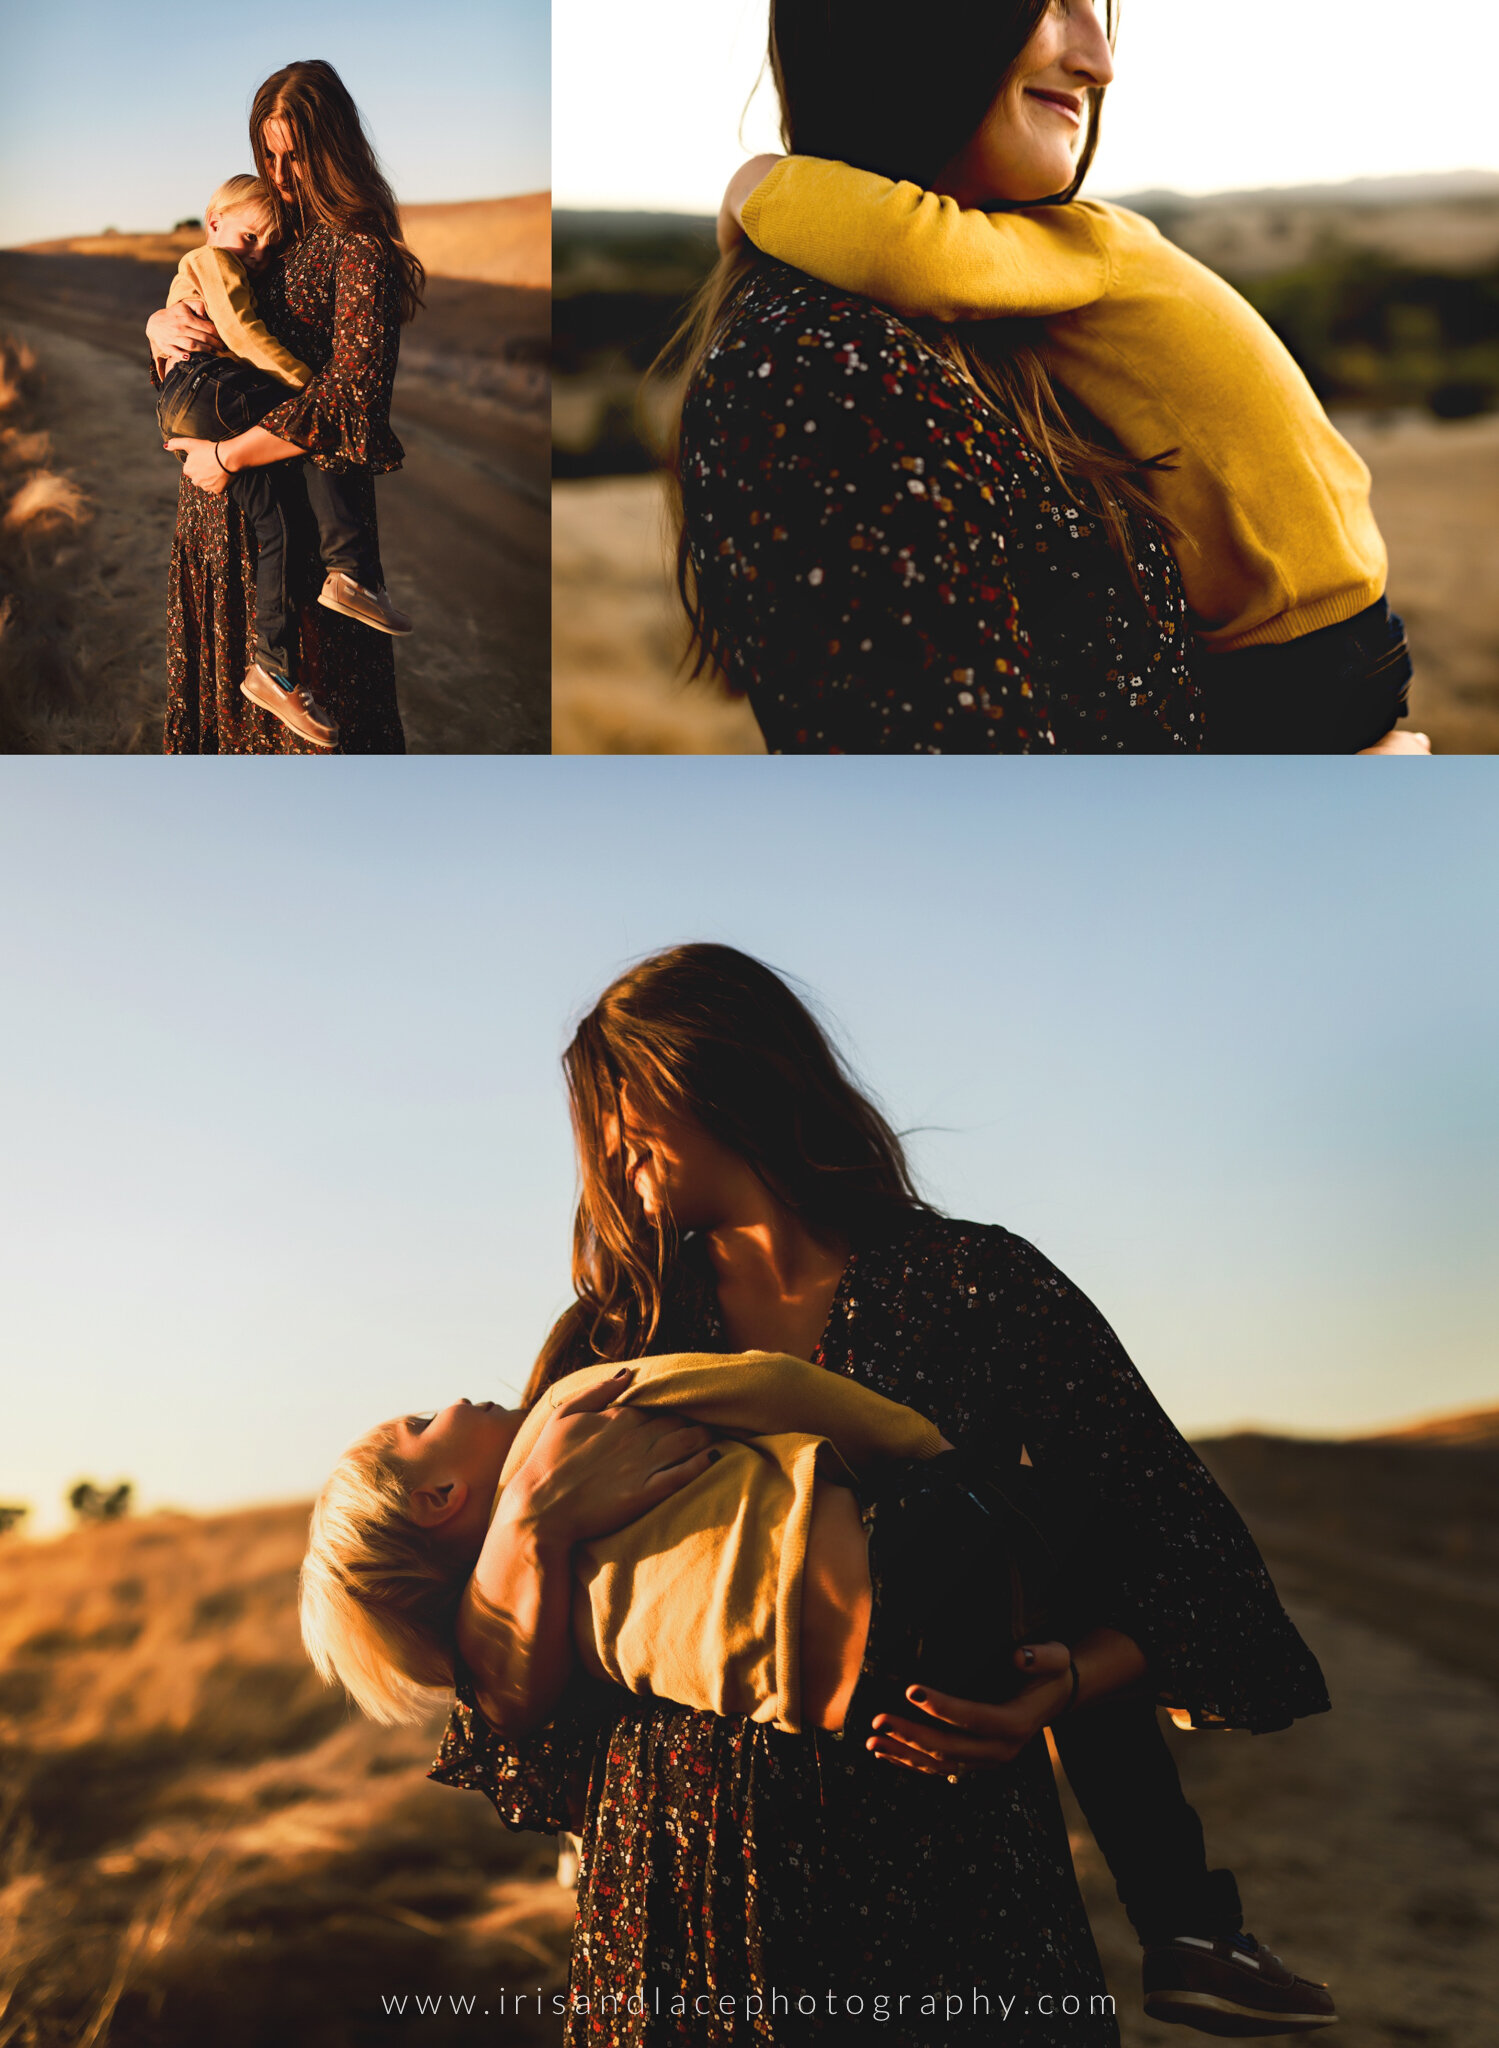 Capturing Authentic Motherhood  |  Iris and Lace Photography |  NorCal Family Photos 